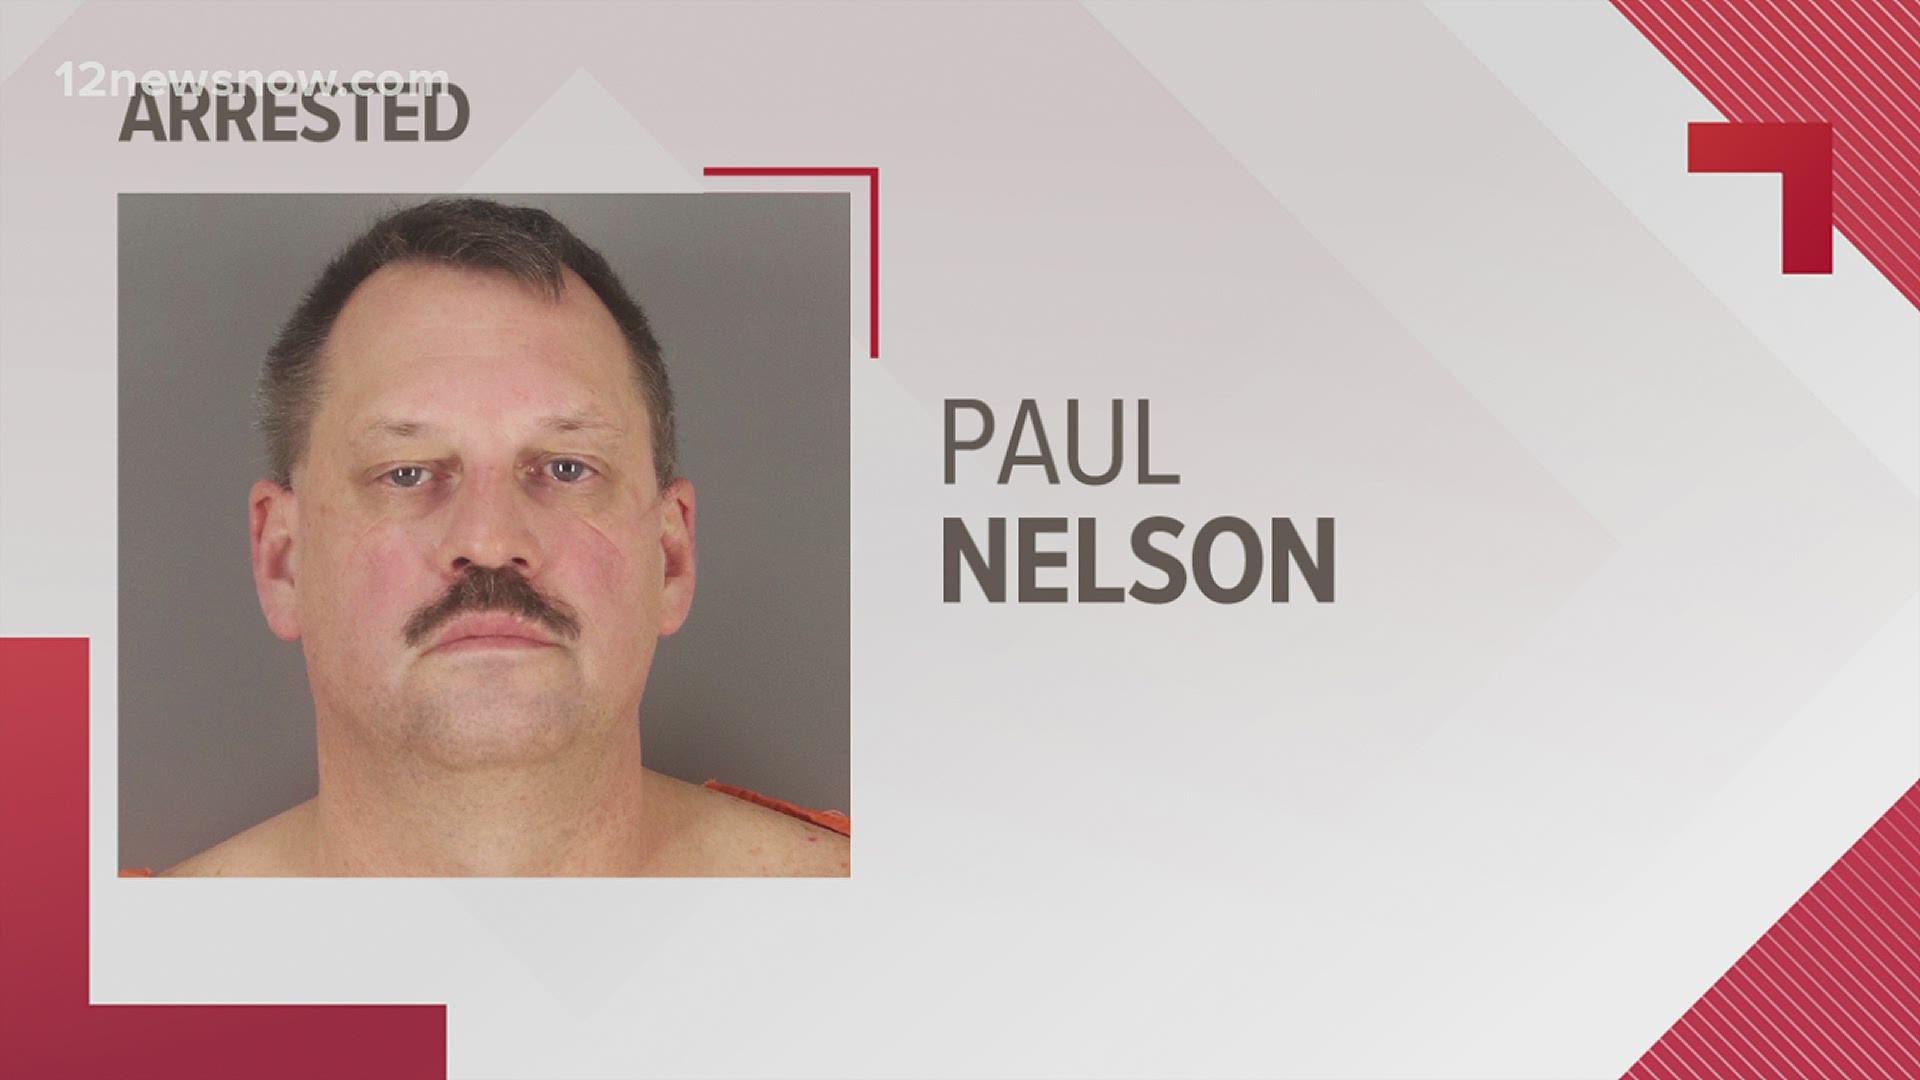 The Texas Attorney General’s Child Exploitation Unit and police officers executed a search warrant and arrest warrant on Wednesday. Paul Nelson was taken to jail